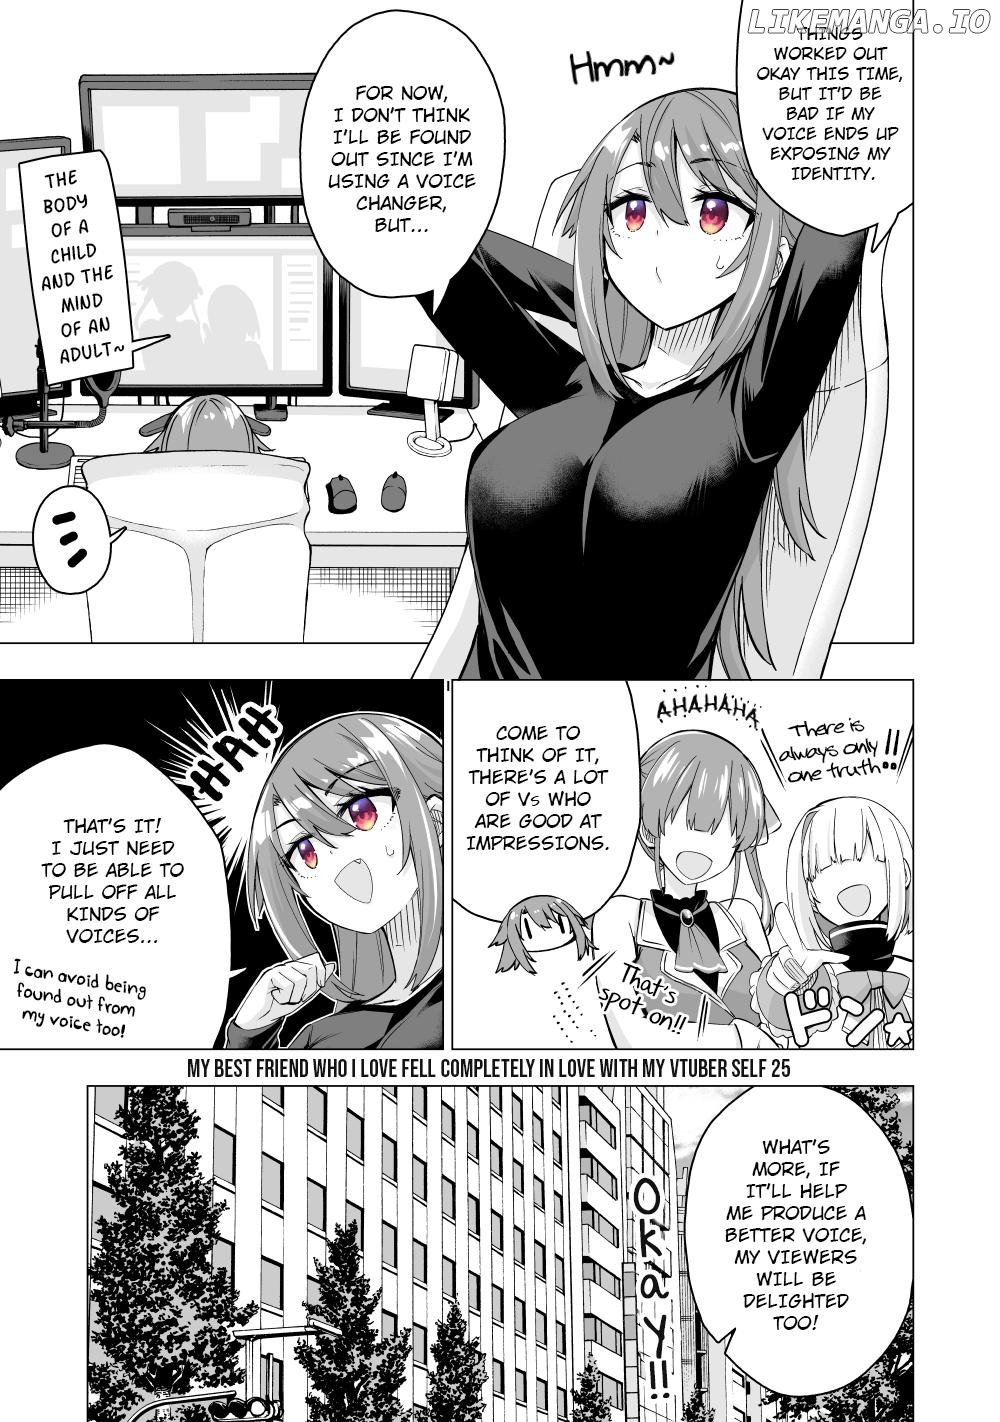 My Best Friend Who I Love Fell Completely In Love With My Vtuber Self chapter 25 - page 2